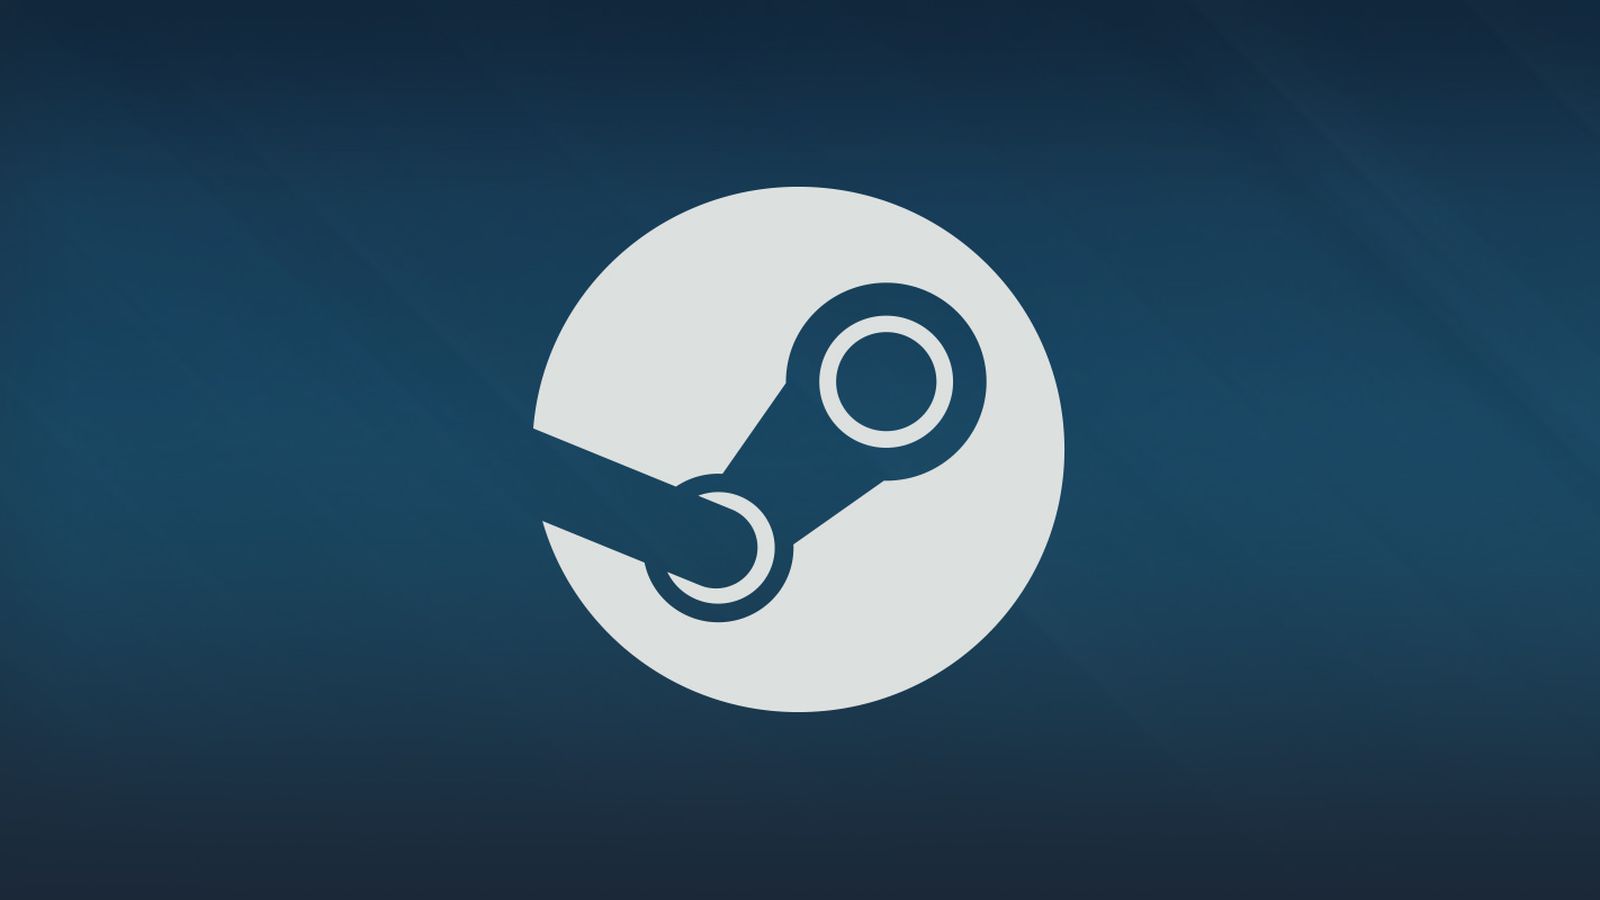 Image for Steam is hosting a celebration of 'digital tabletop games' from October 21